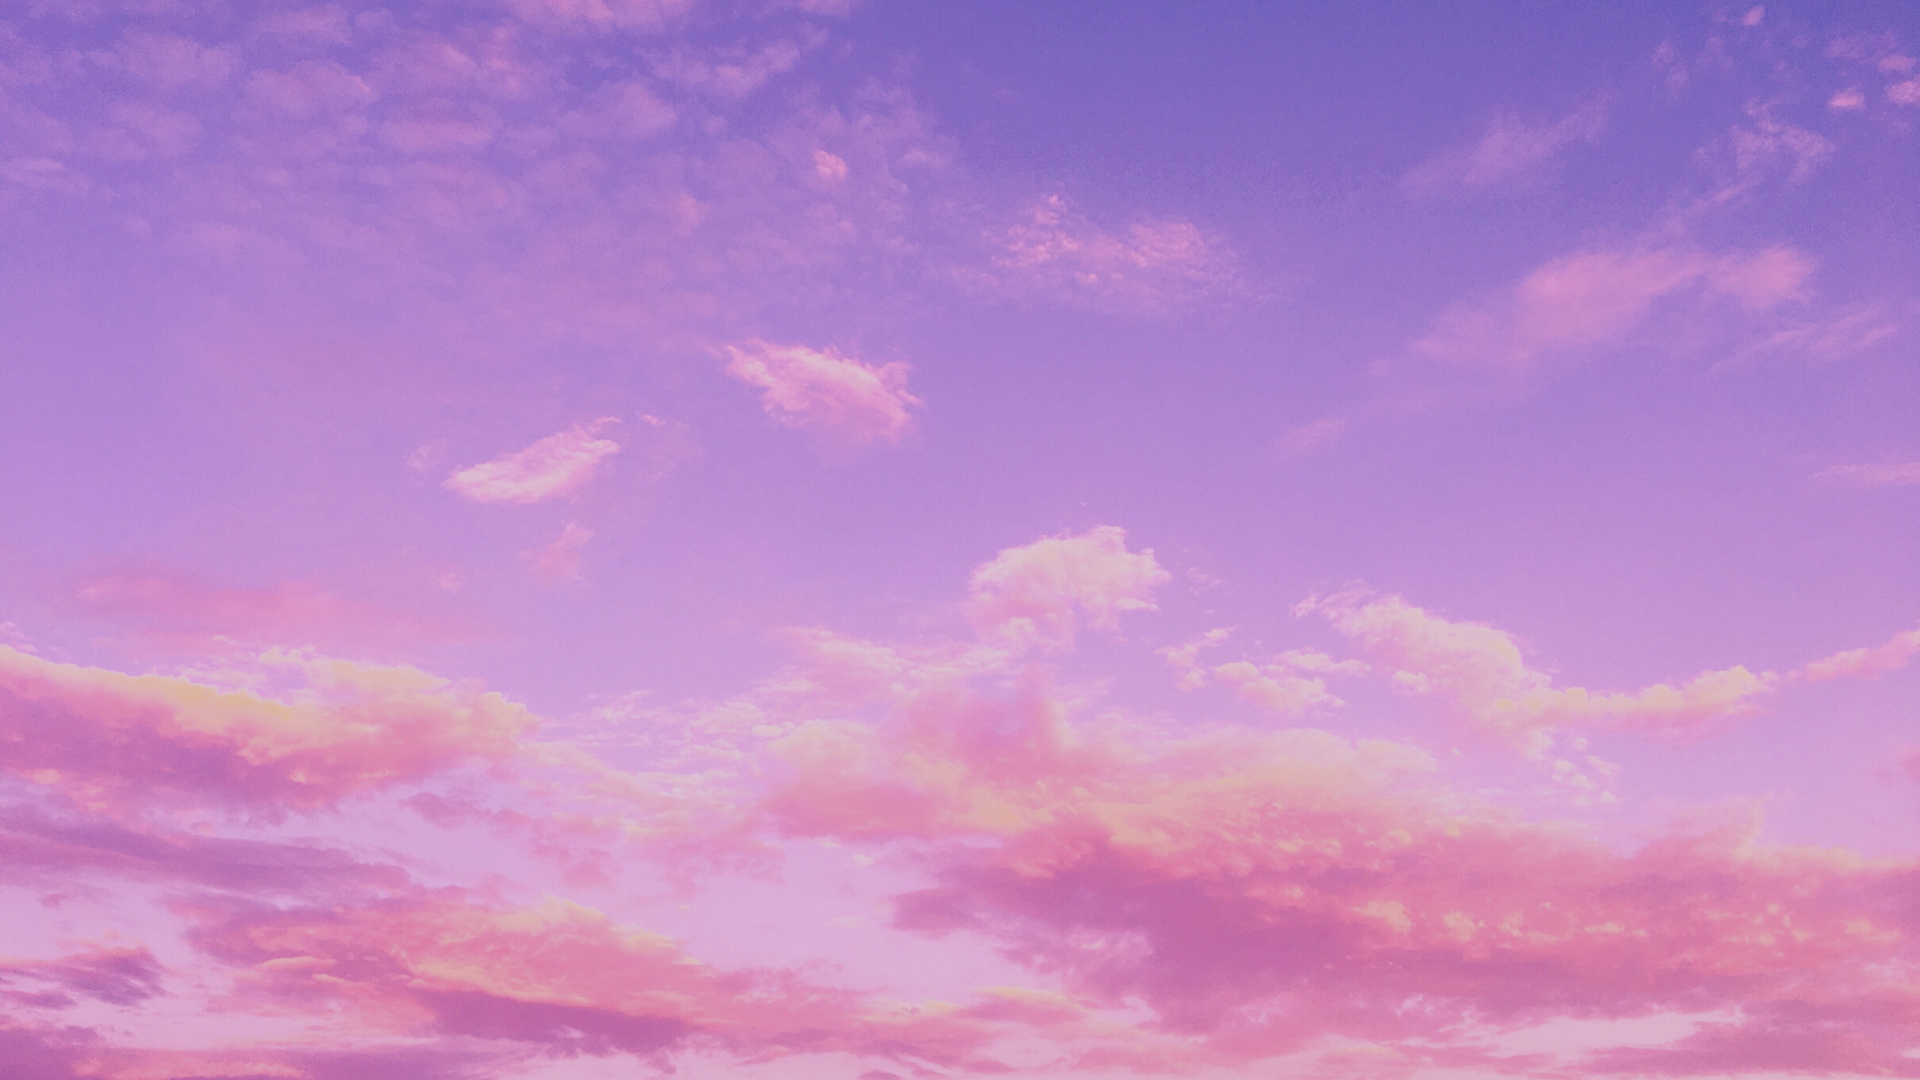 Cloudy Skies Cotton Candy Dreams Free Macbook Wallpaper Laptop and Desktop Background Aesthetic. Pink clouds sky, Pink clouds wallpaper, Clouds